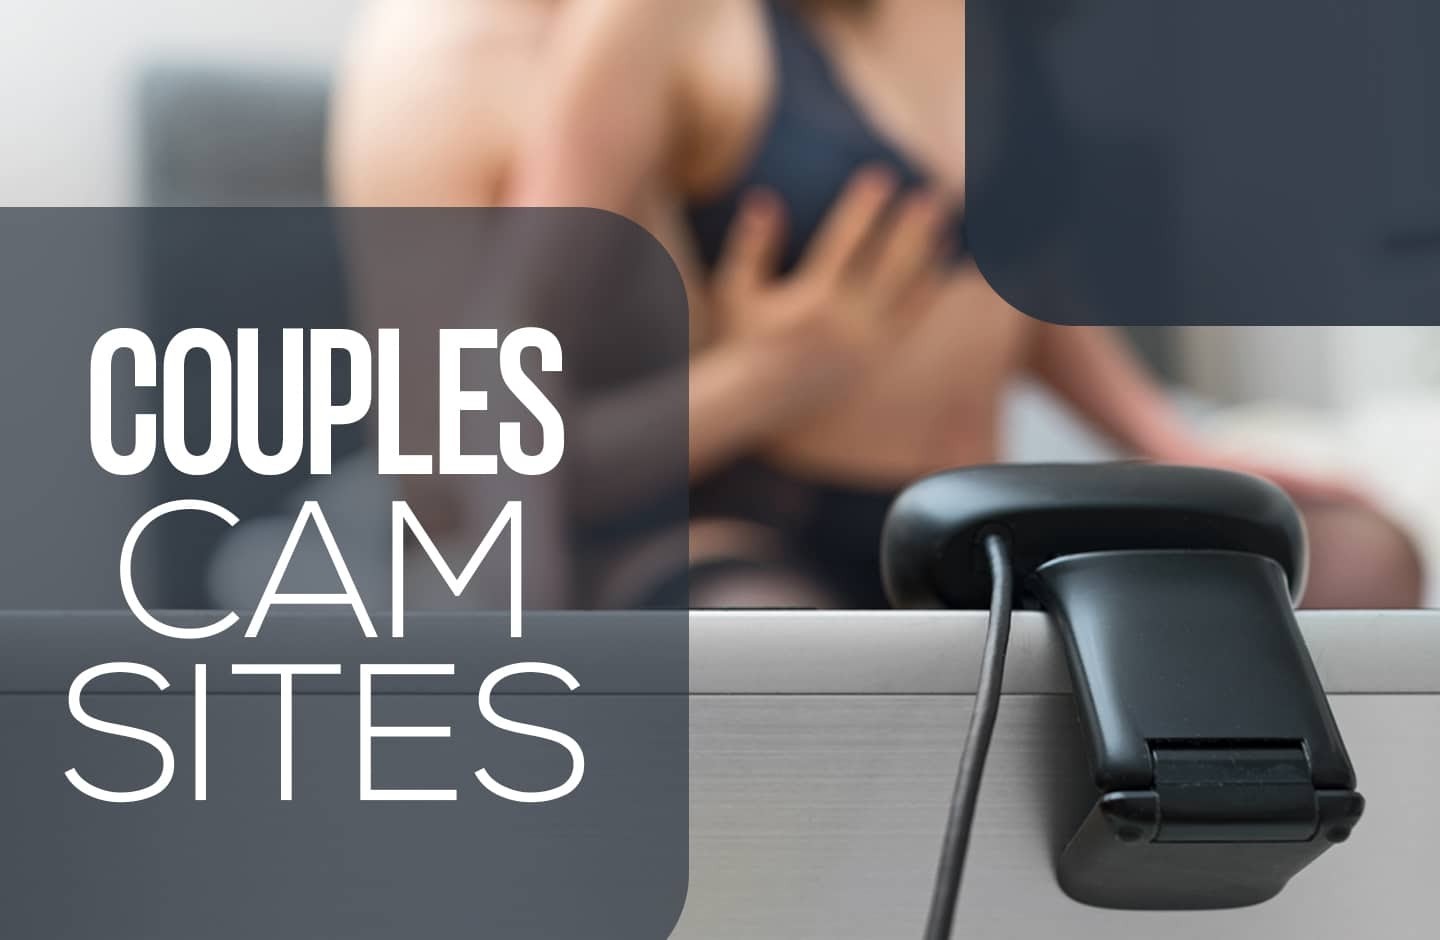 Top 6 Couples Cam Sites Reviewed photo photo